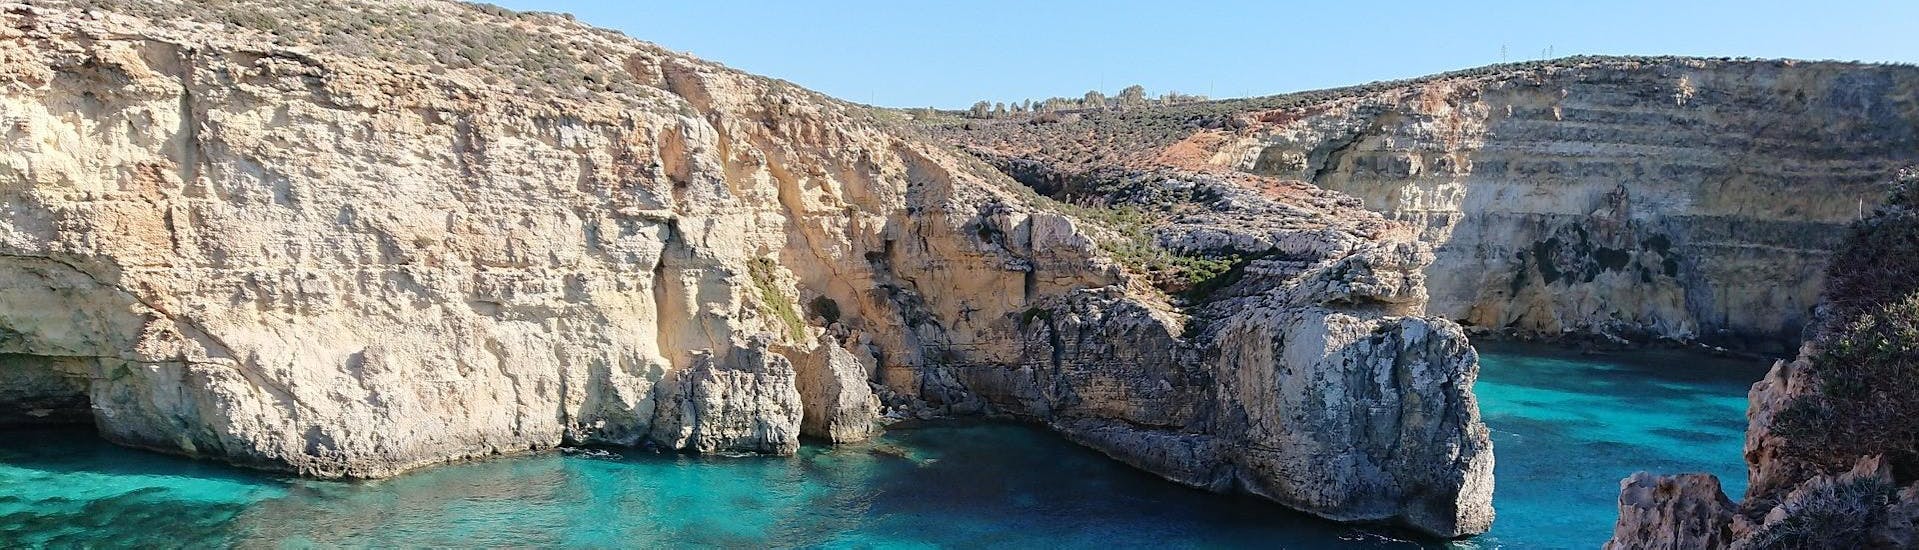 View of the island of Malta where the activities of Rush Watersports take place.